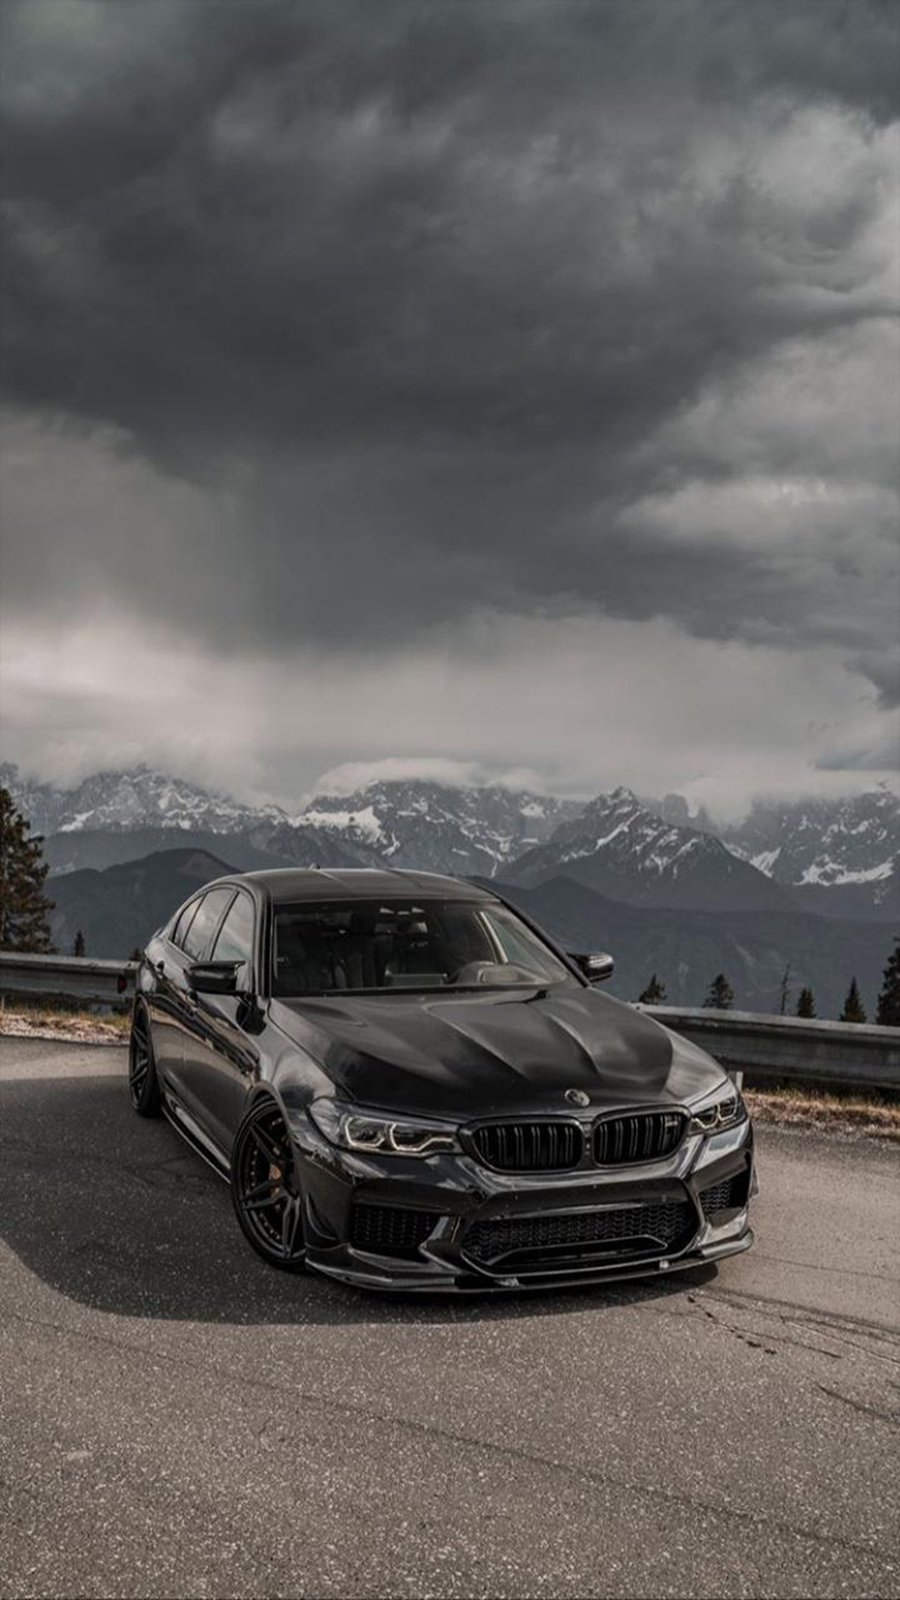 BMW Wallpaper – Most Popular BMW Wallpapers Free Download